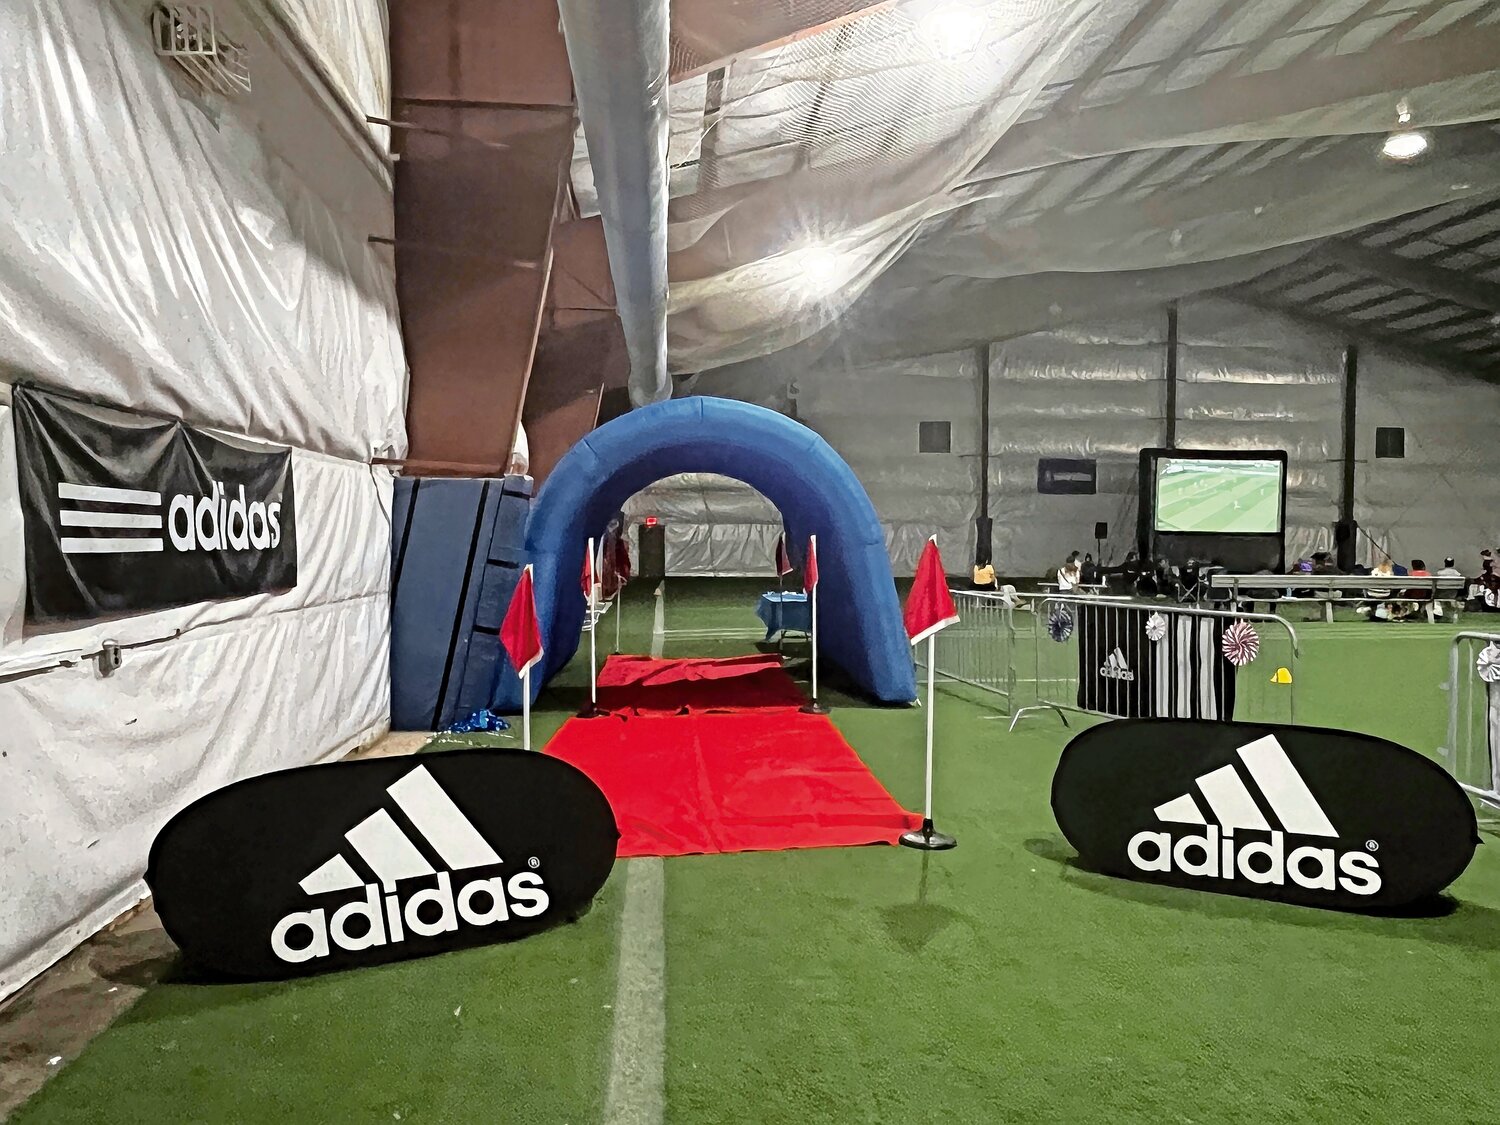 The entrance for the World Cup watch party hosted by Nassau County Executive Bruce Blakeman and the Long Island Soccer Club at Globall Sports Center allow the youngsters to run through the tunnel and feel a part of the game and celebration.